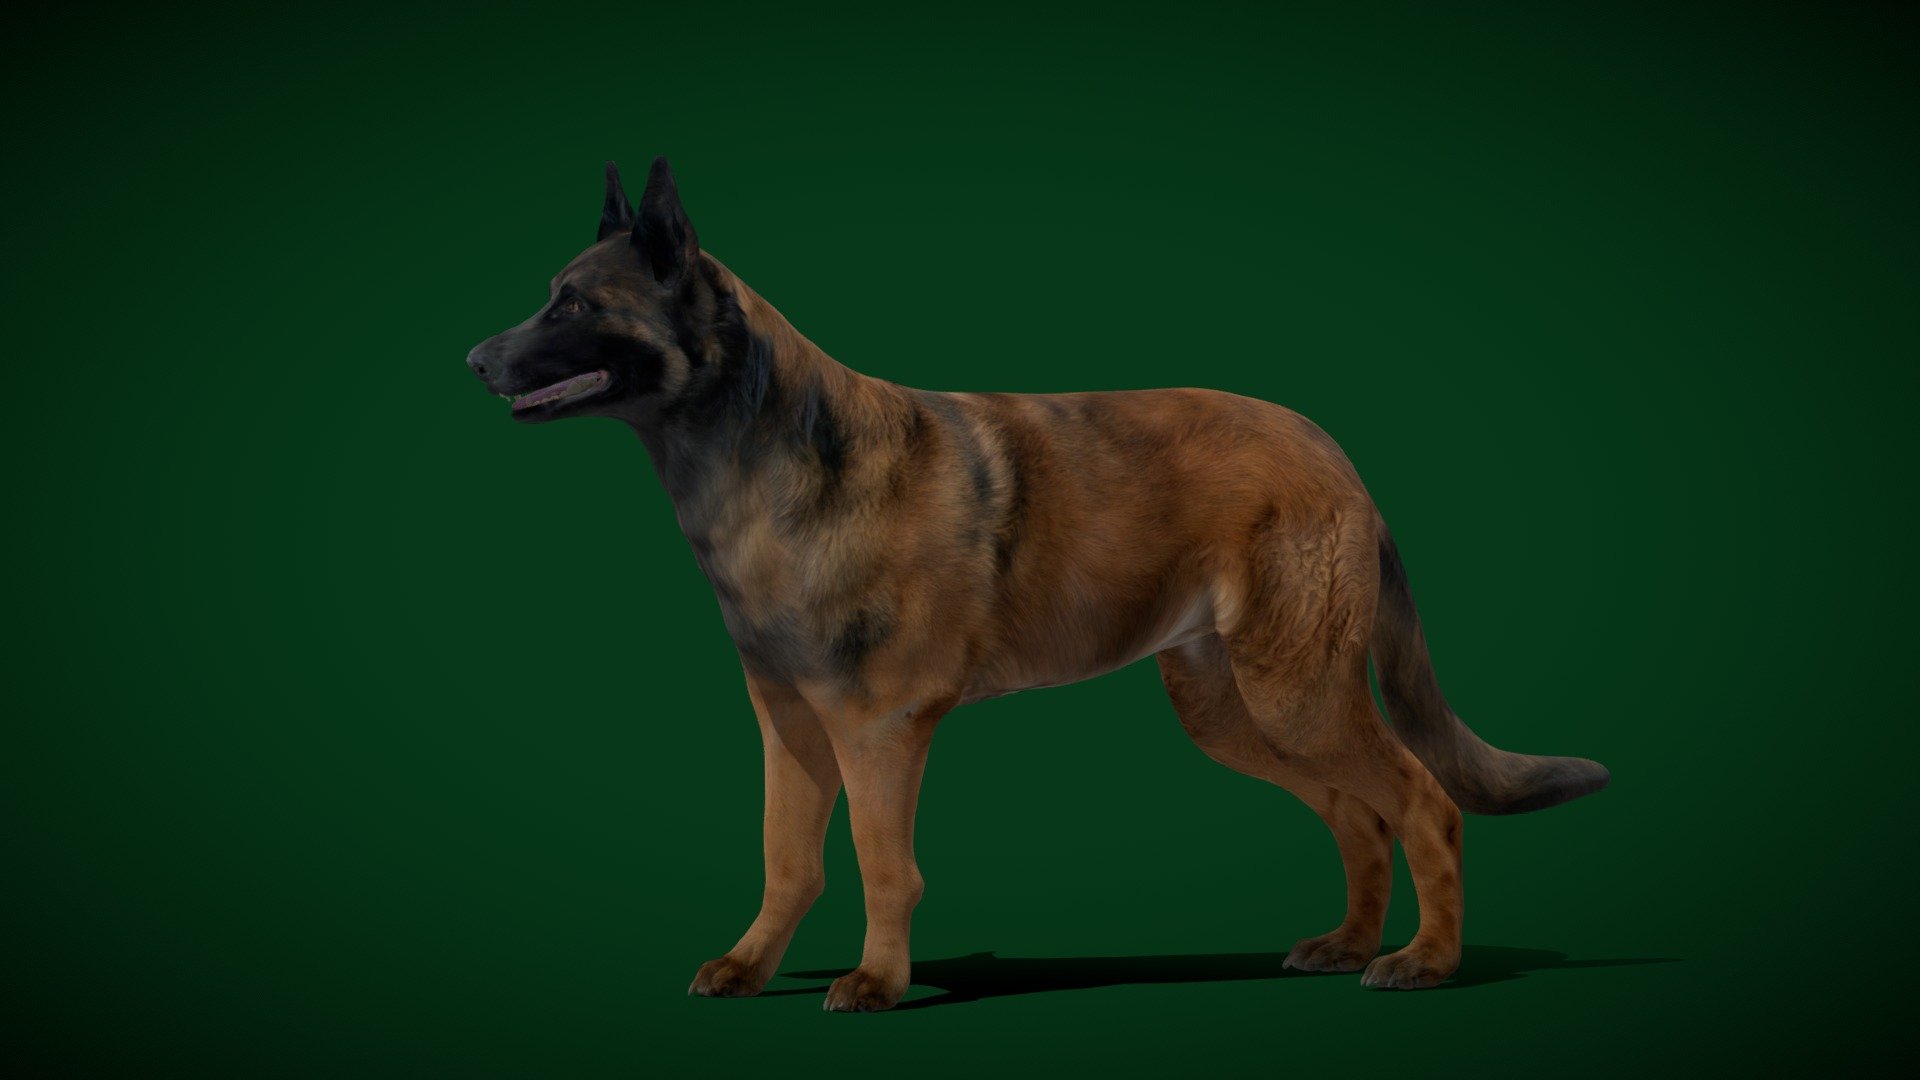 Belgian Shepherd  Dog Breed (Chien de Berger Belge)Canine,Belgian breed

Canis lupus familiaris Animal Mammal(Sheepdog)Pet,cute

1 Draw Calls

MidPoly

Game Ready (Character)

Subdivision Surface Ready

11- Animations

4K PBR Textures Material

Unreal/Unity FBX

Blend File 3.6.5 LTS / 4

USDZ File (AR Ready). Real Scale Dimension (Xcode ,Reality Composer, Keynote Ready)

Textures Files

GLB File (Unreal 5.1 Plus Native Support)


Gltf File ( Spark AR, Lens Studio(SnapChat) , Effector(Tiktok) , Spline, Play Canvas,Omiverse ) Compatible




Triangles -70936



Faces -37326

Edges -73302

Vertices -36021

Diffuse, Metallic, Roughness , Normal Map ,Specular Map,AO

The Belgian Shepherd, also known as the Belgian Sheepdog or the Chien de Berger Belge, is a Belgian breed of herding dog of medium size.
 - Belgian Shepherd Dog Breed (GameReady) - Buy Royalty Free 3D model by Nyilonelycompany 3d model